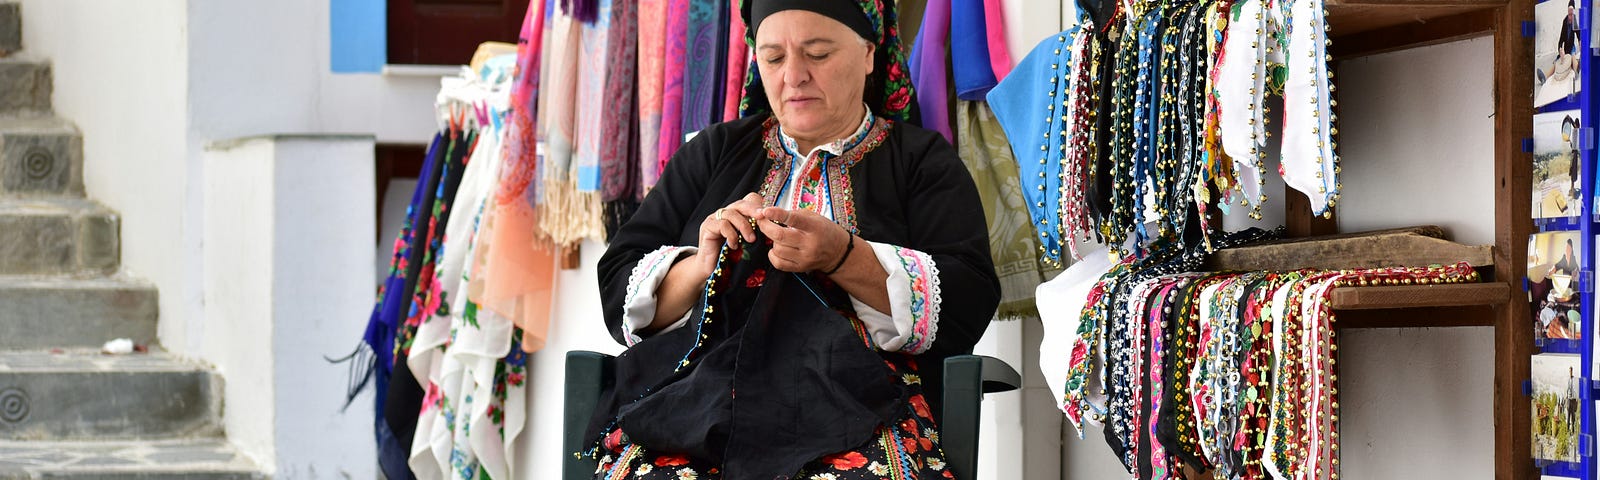 An Eastern-European woman in colorful garb sits outside a store and sews